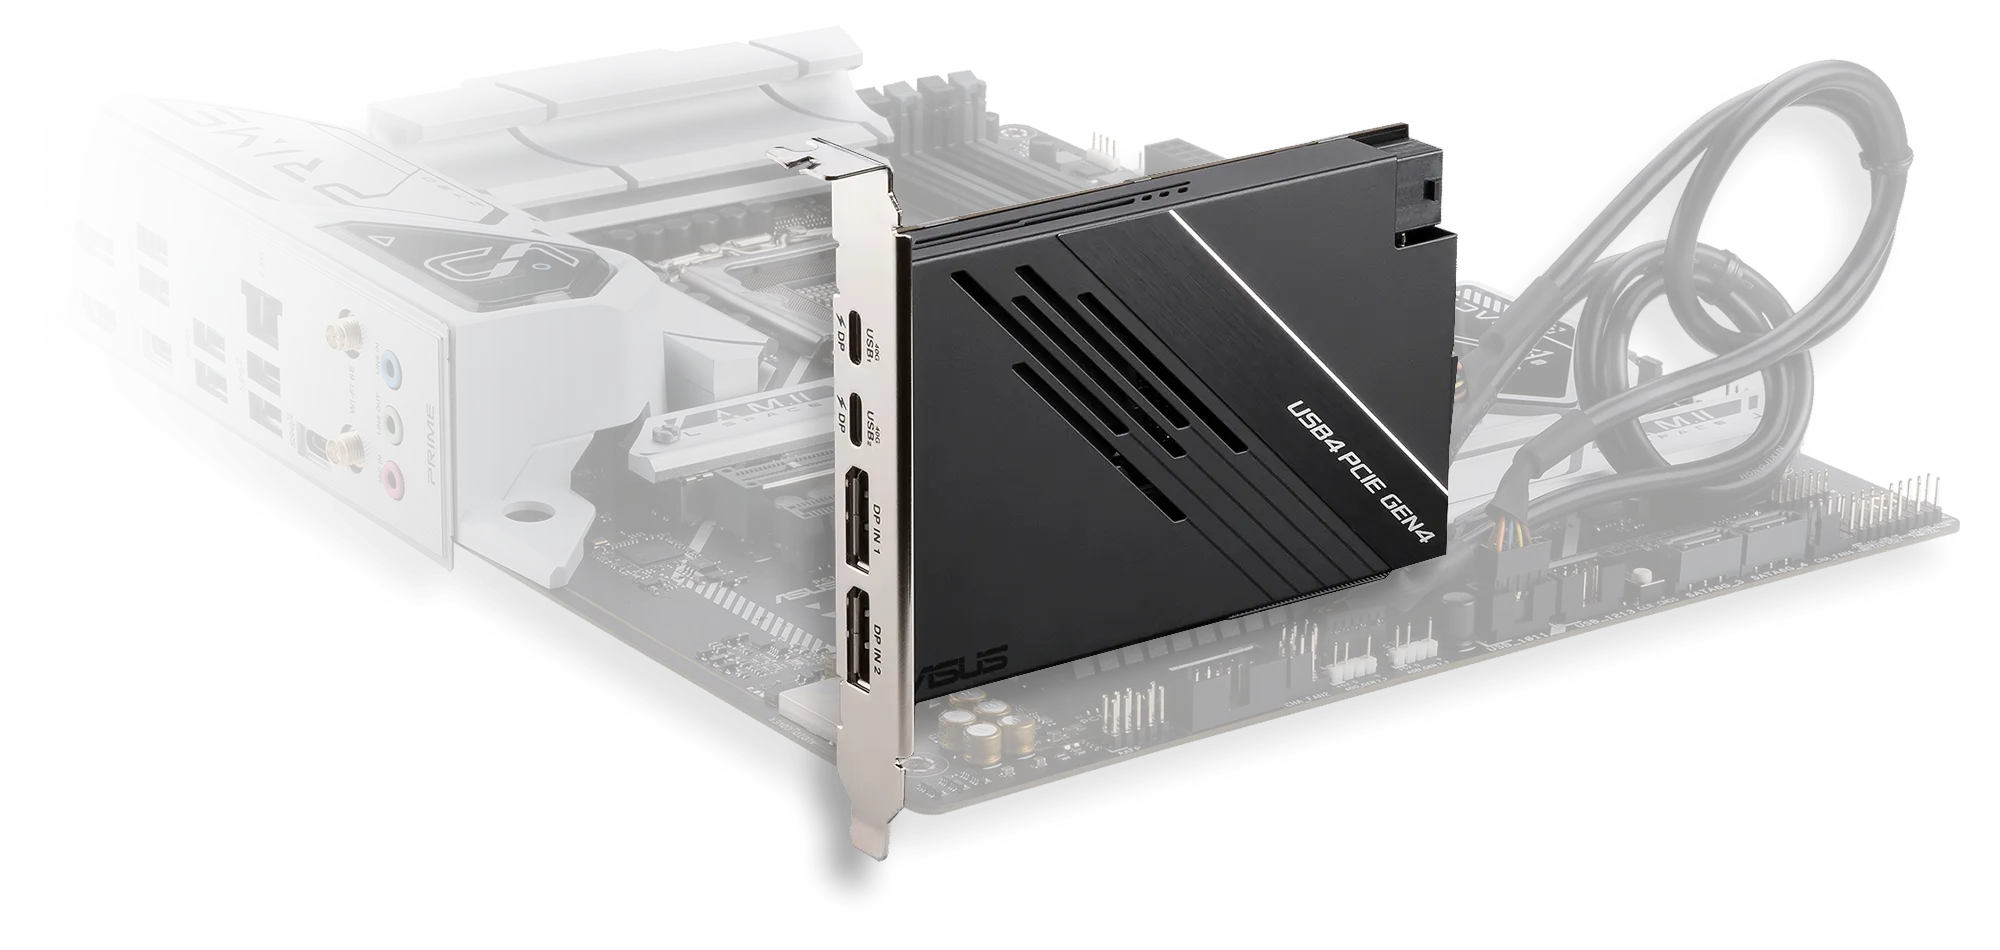 The USB4 PCIe Gen4 Card is installed on a motherboard